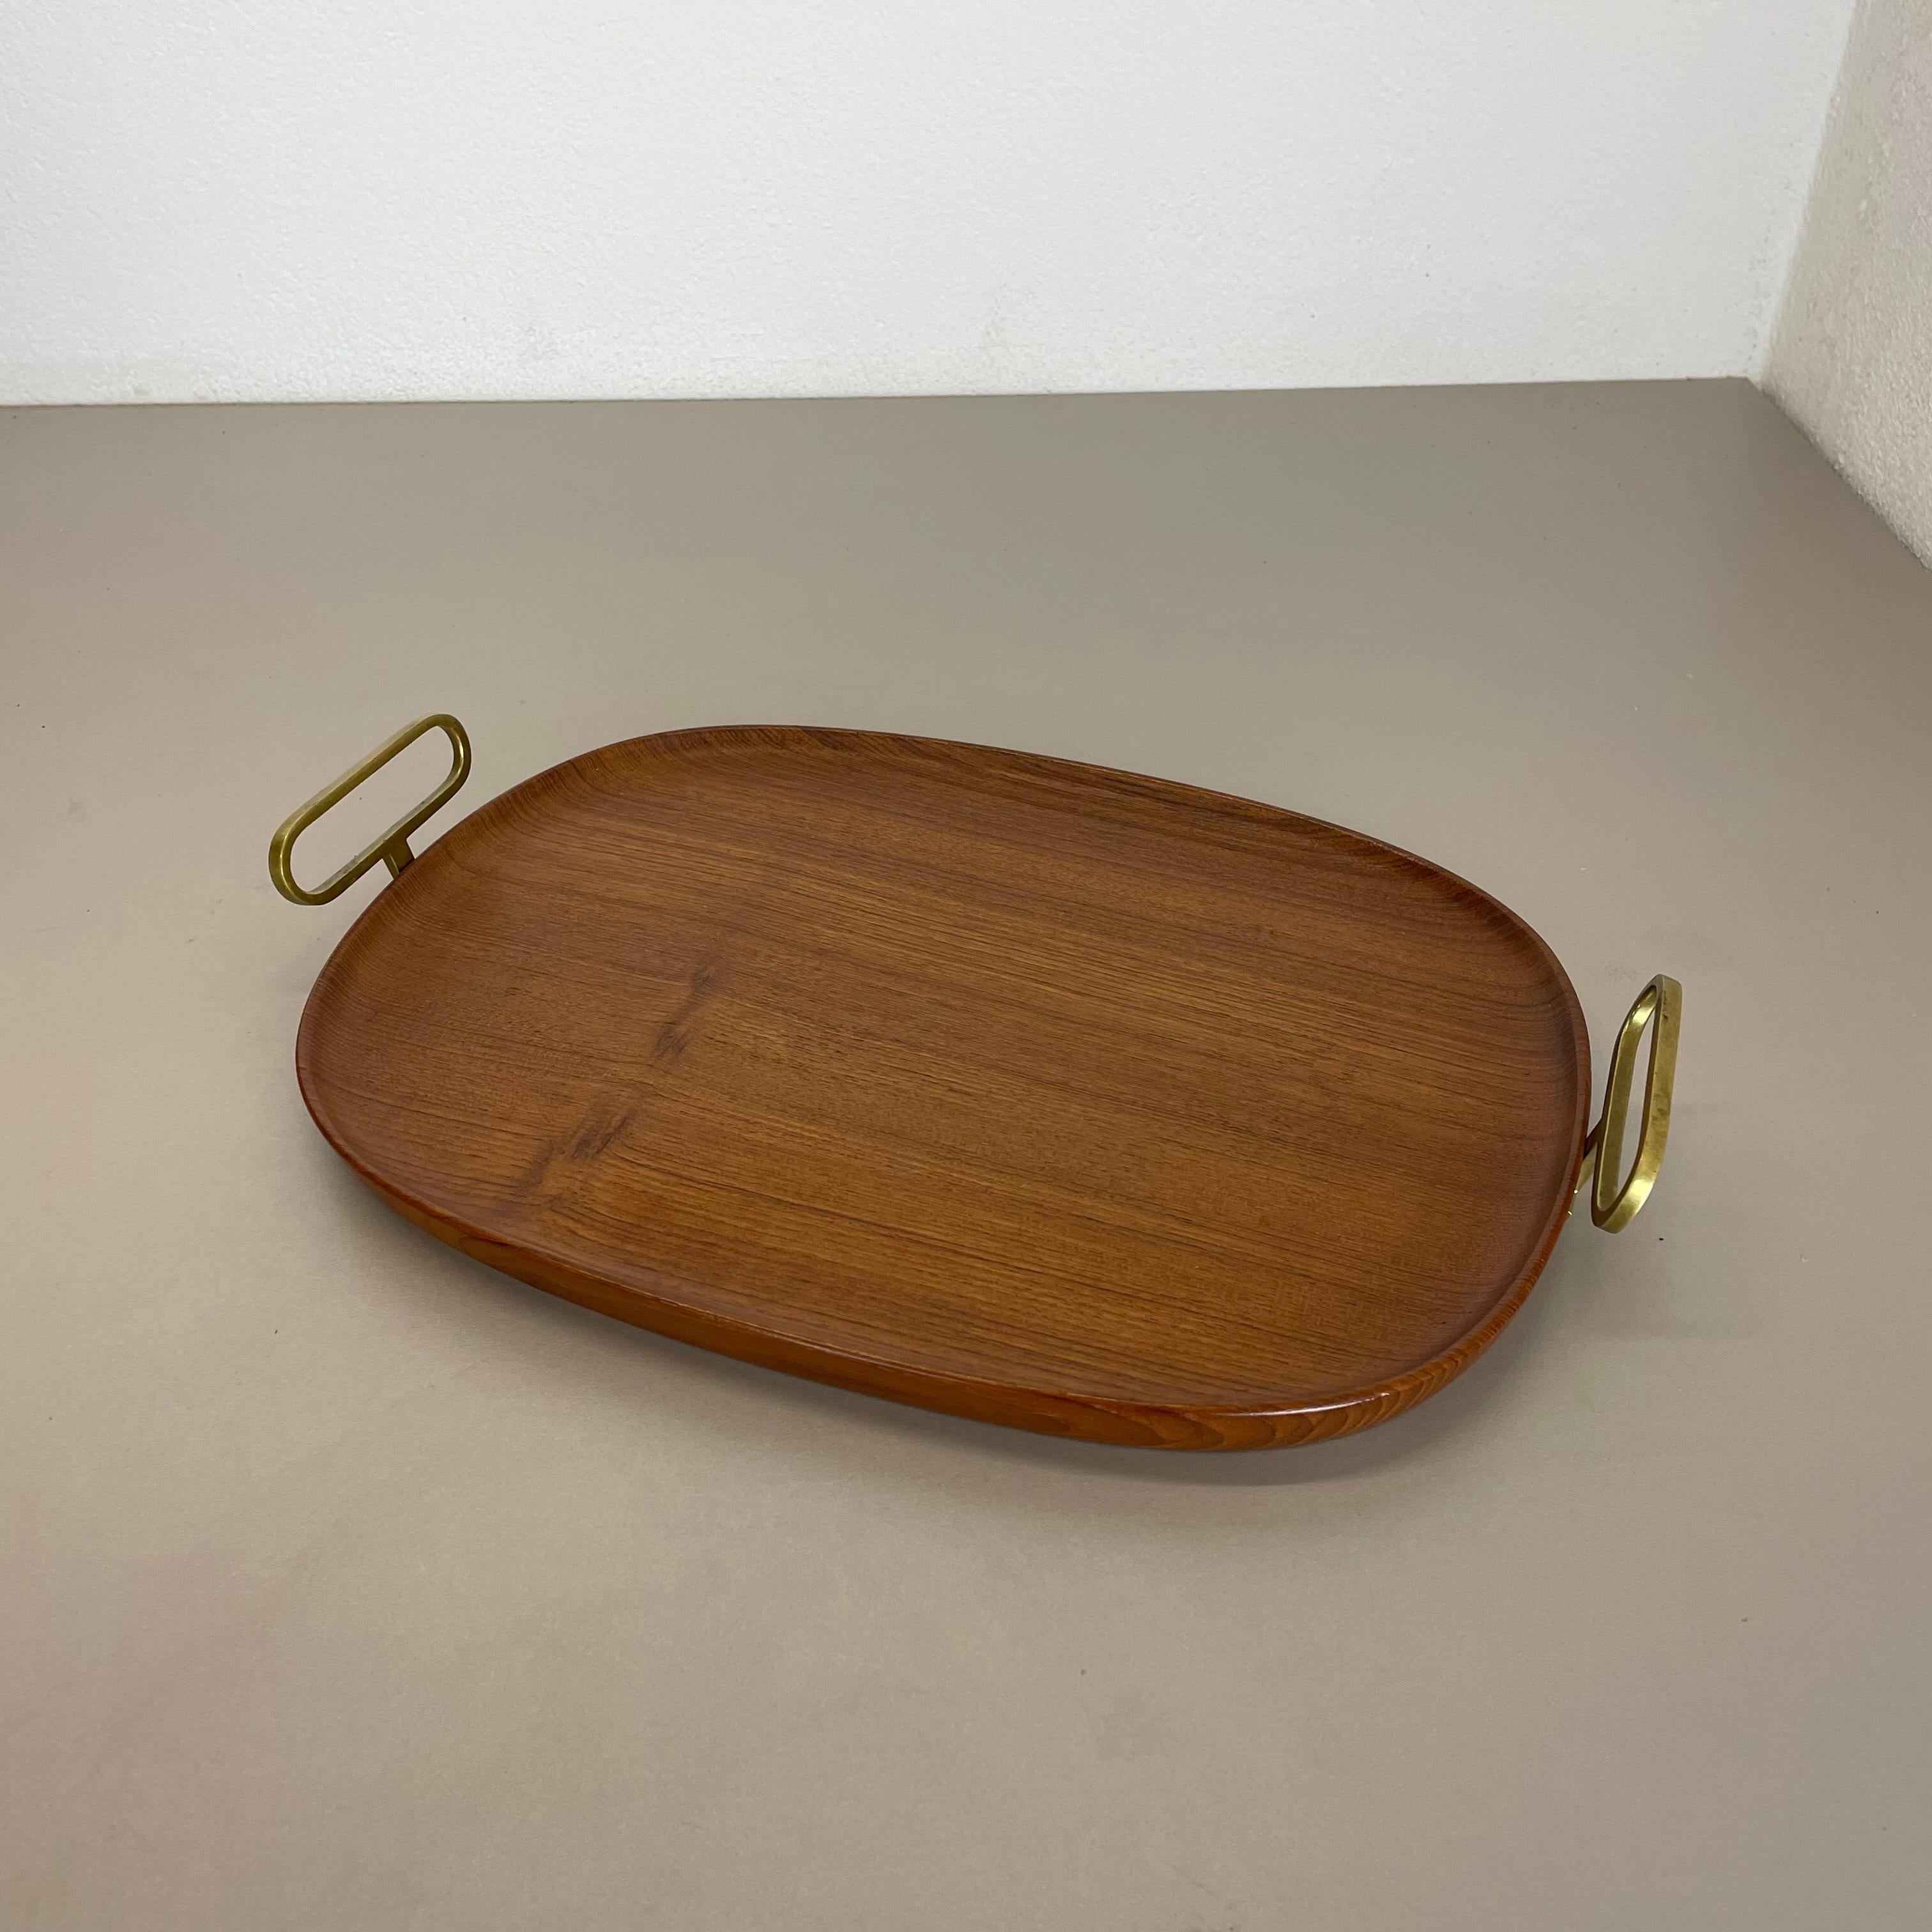 Article:

tray element


Design:

Carl Auböck, 1950s



Producer:

Auböck Workshop Vienna, Austria



Origin:

Austria



Age:

1950s



Description:

Original 1950s tray element made of solid teak wood and brass loops at the sides for carrying.